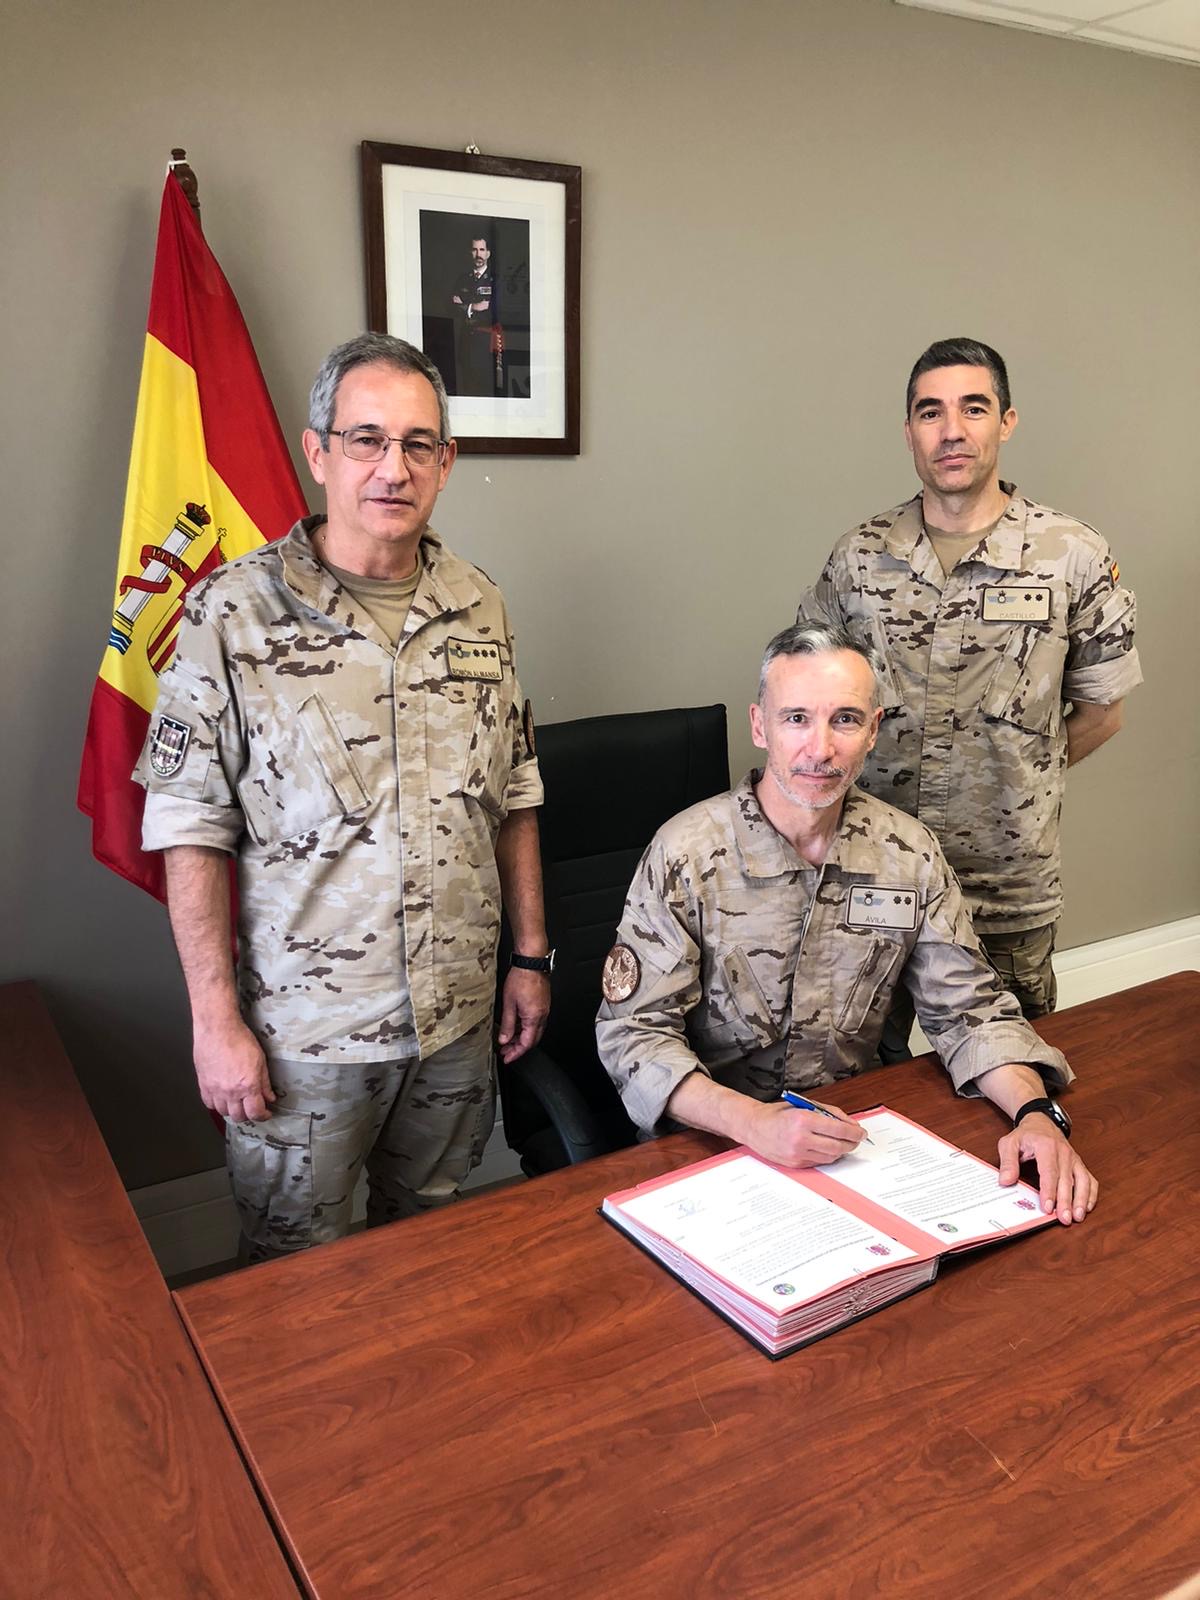 Incoming Force Commander signs Act of Relay of Command